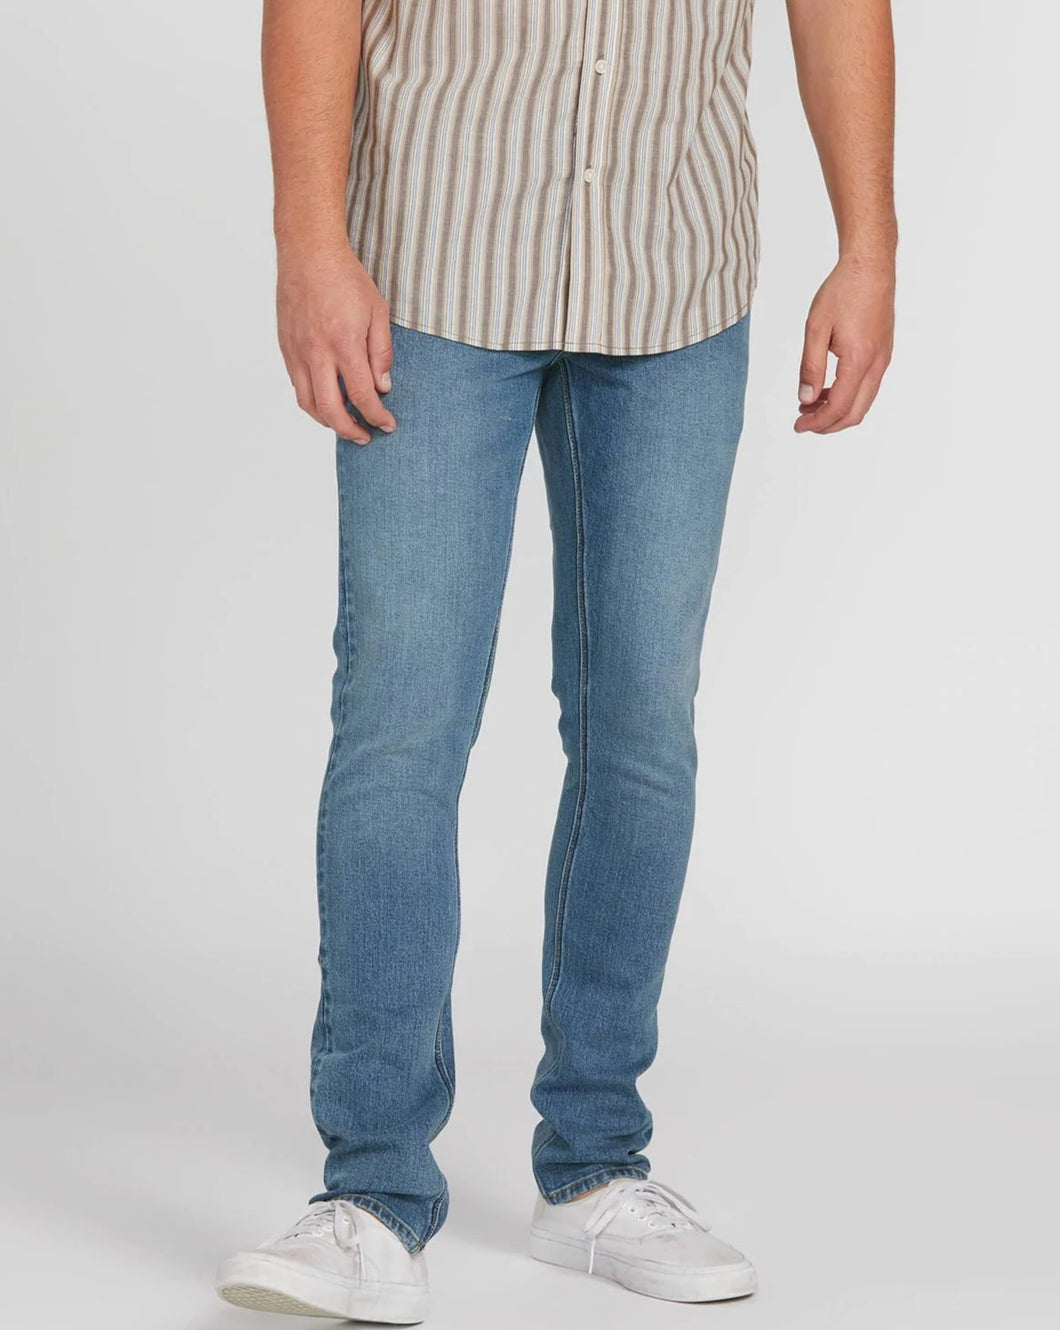 2X4 SKINNY TAPERED JEANS - OLD TOWN INDIGO